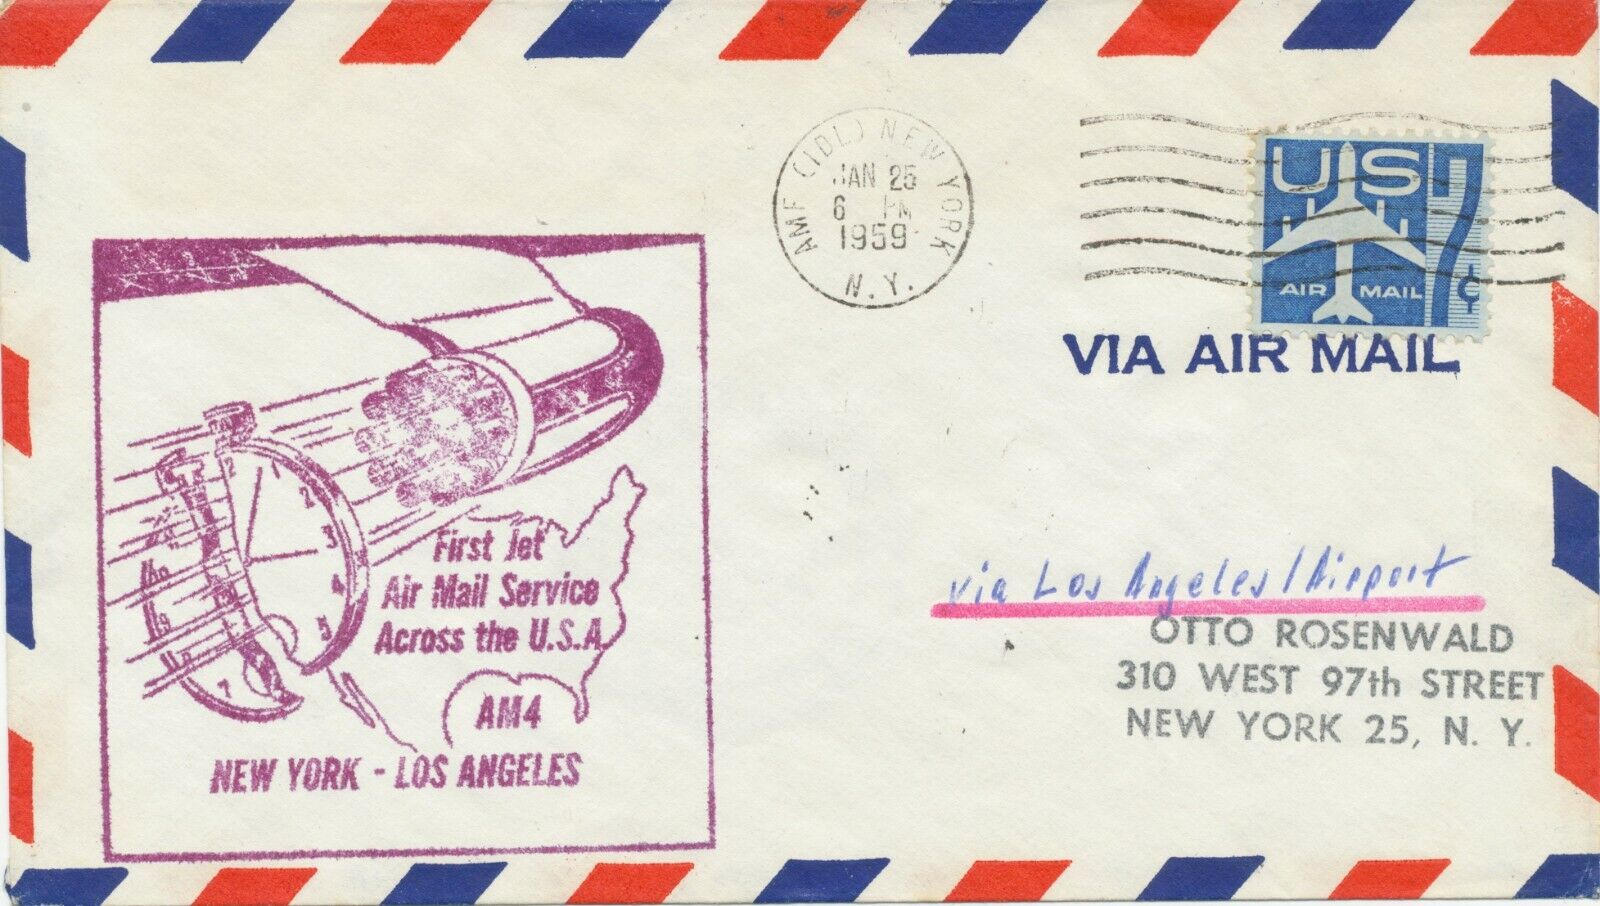 USA 1959 Pierwszy lot A.M. 4 - First Jet Air Mail Service "New York - Los Angeles"